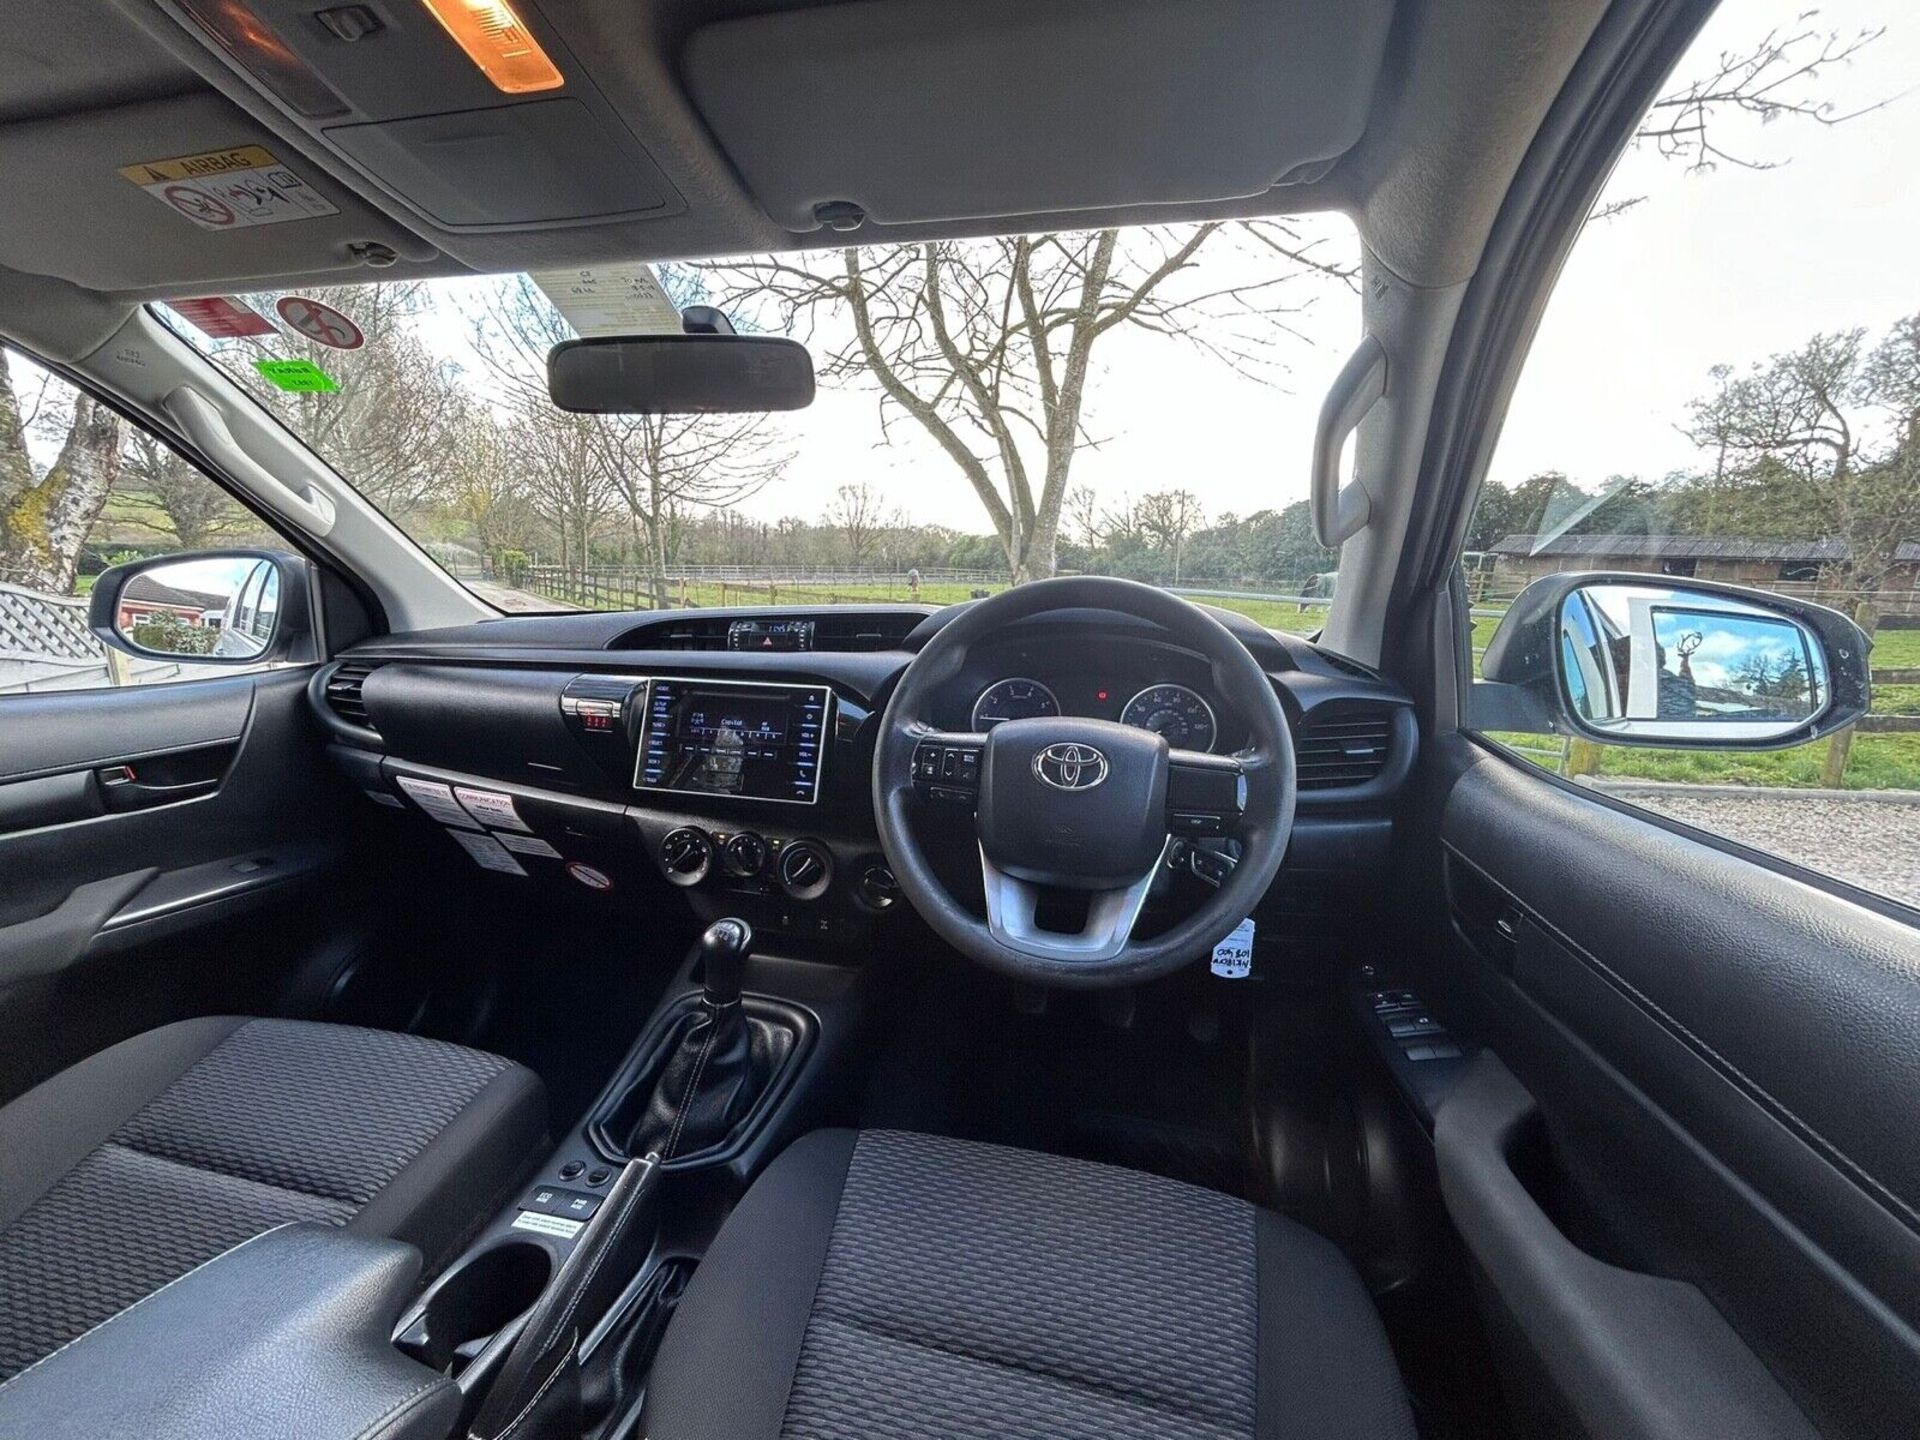 2018 TOYOTA HILUX ACTIVE DOUBLE CAB 2.4 D-4 EURO 6 - Image 5 of 10